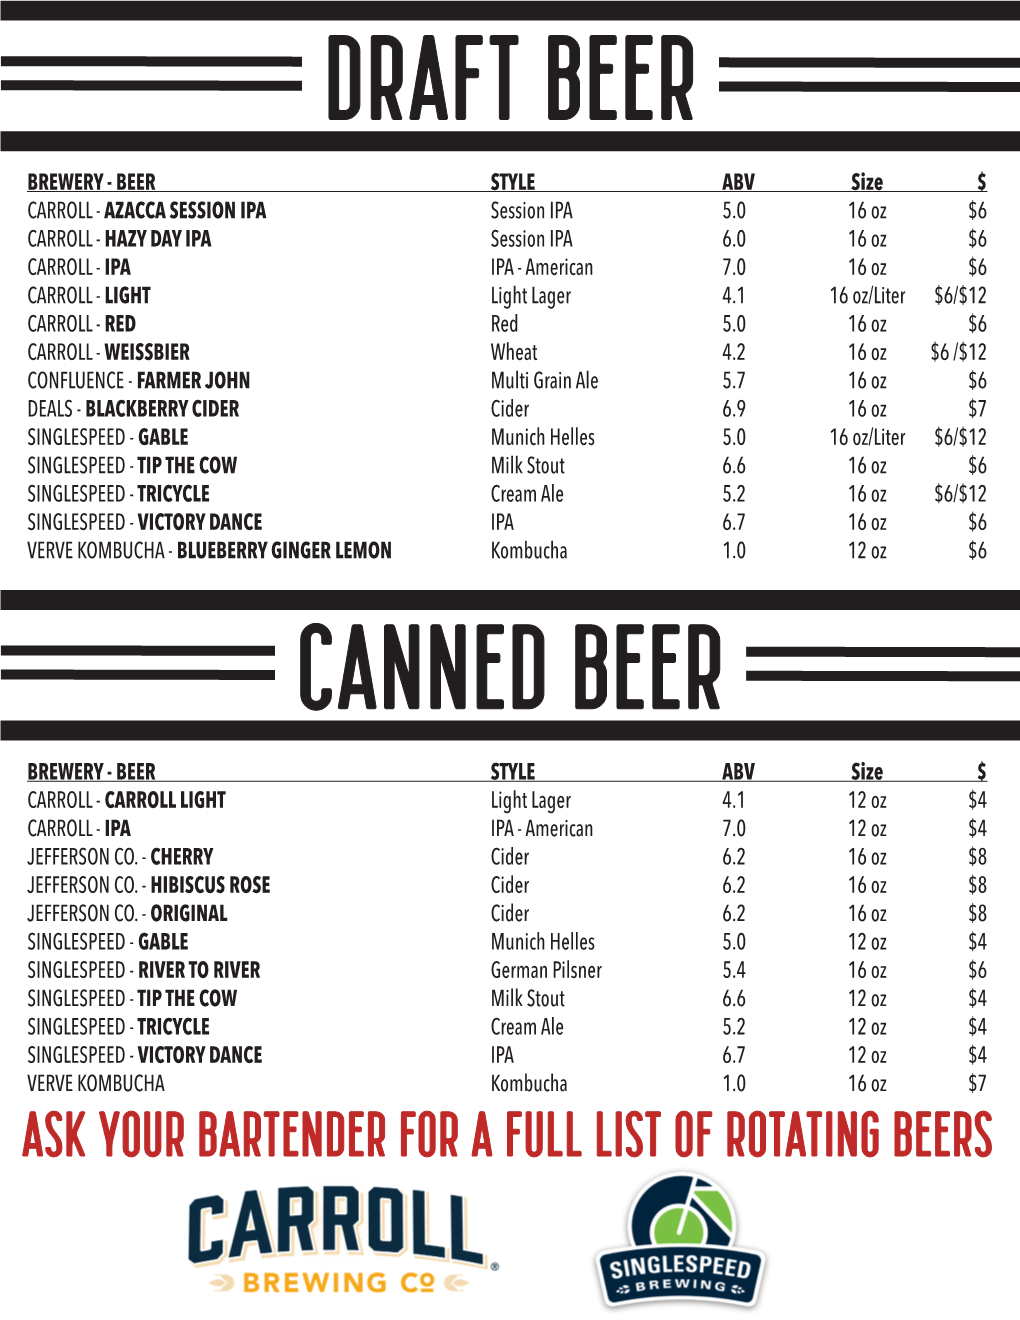 Ask Your Bartender for a FULL List of Rotating Beers COCKTAILS PACKAGED DRINKS